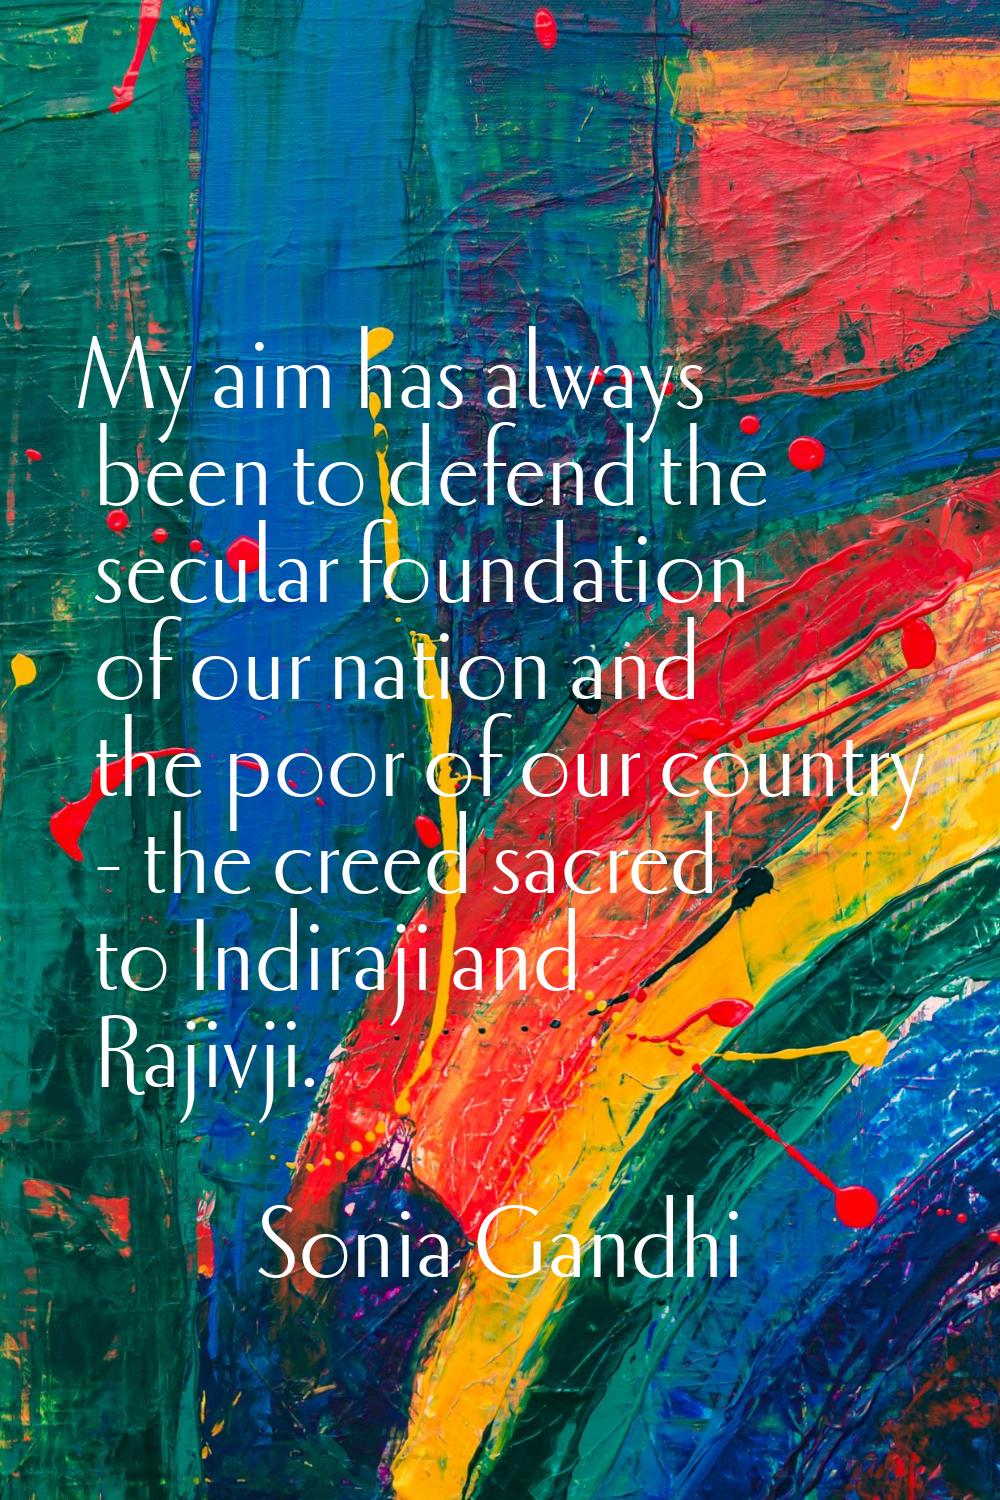 My aim has always been to defend the secular foundation of our nation and the poor of our country -